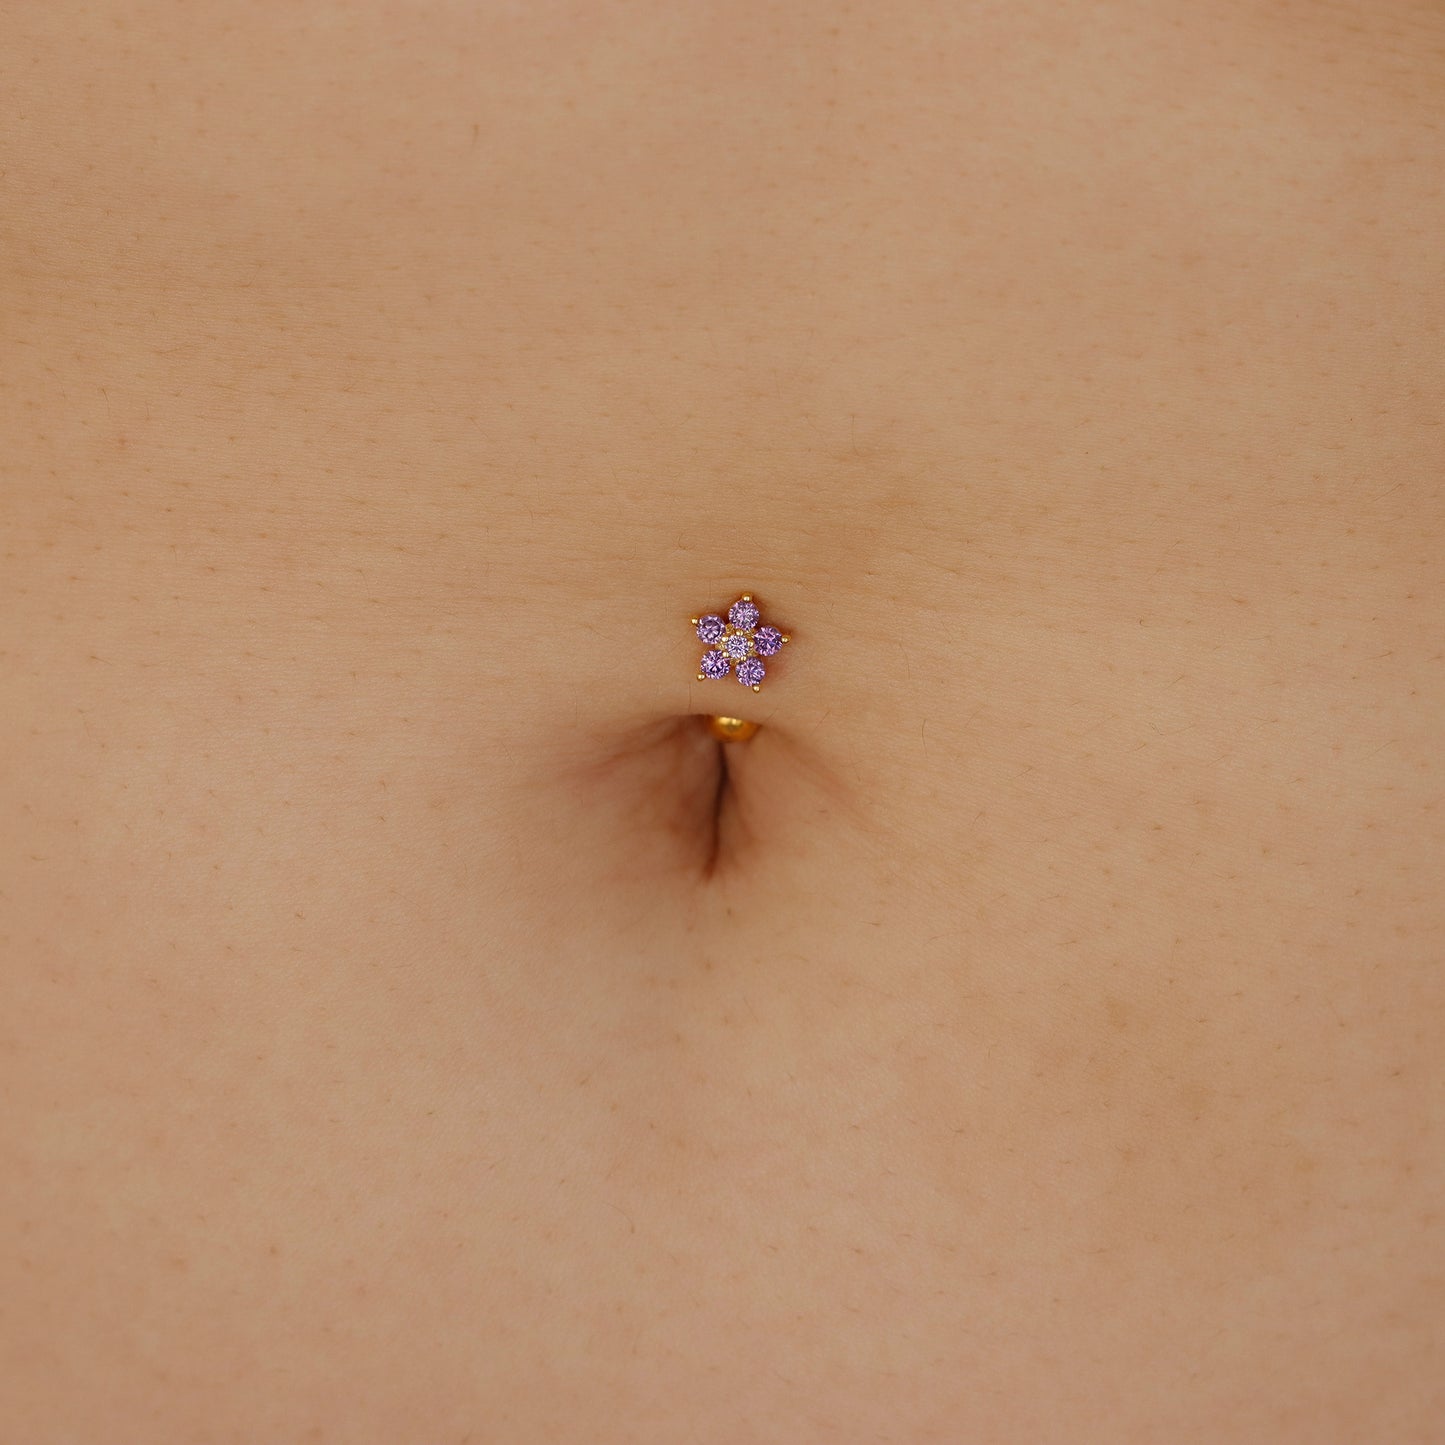 Vermeil | 24k Gold Coated 925 Silver Purple Petite Flower Reverse Belly Ring | 6mm 1/4" 8mm 5/16" 10mm 3/8" - Sturdy South